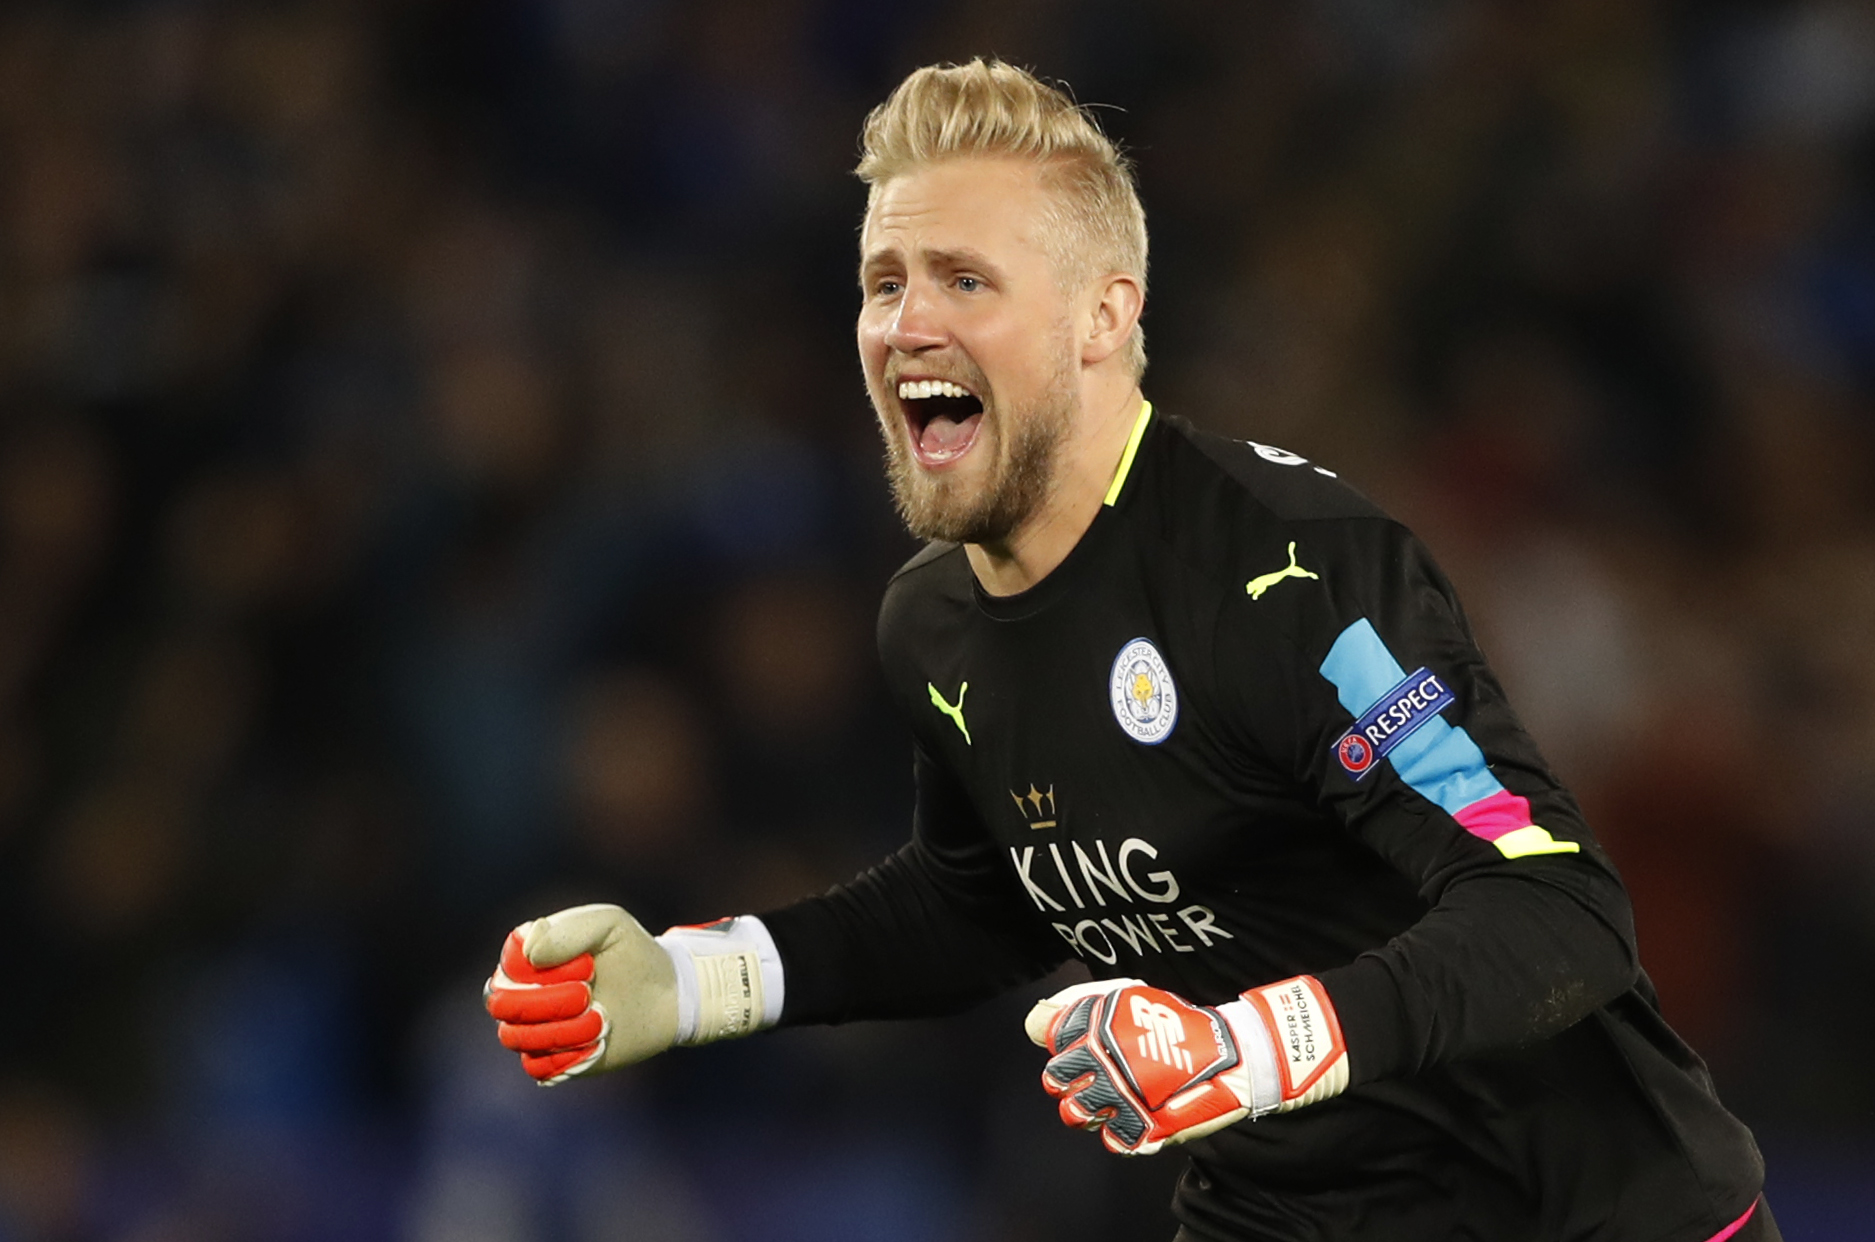 Football: Like father like son, Schmeichel saves day for Leicester